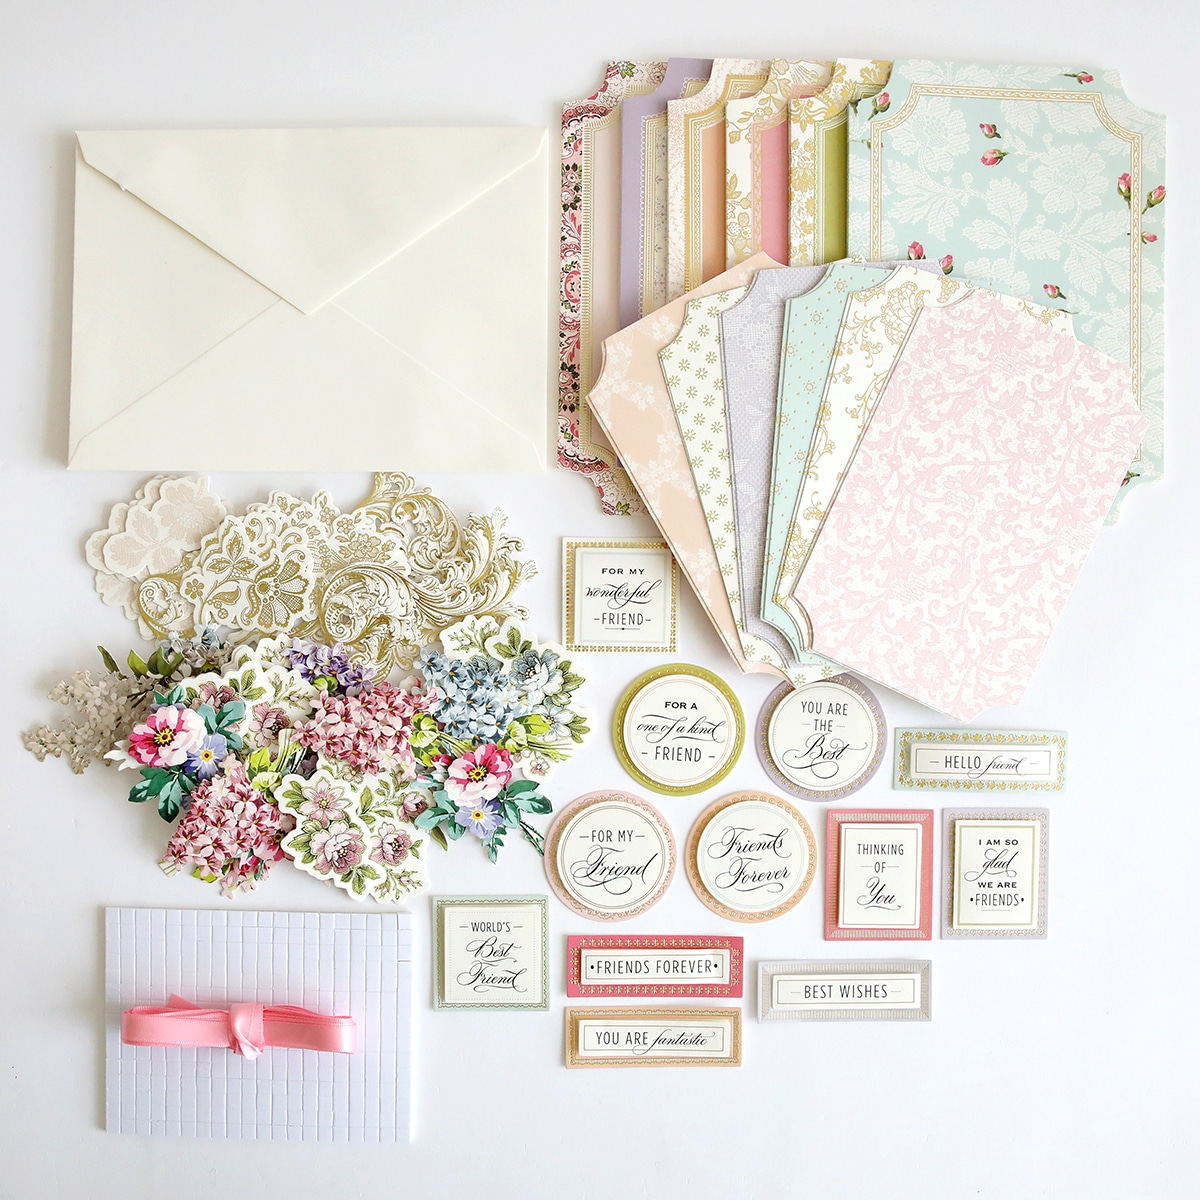 A collection of Simply Friendship Card Making Kit, envelopes, and ribbons.